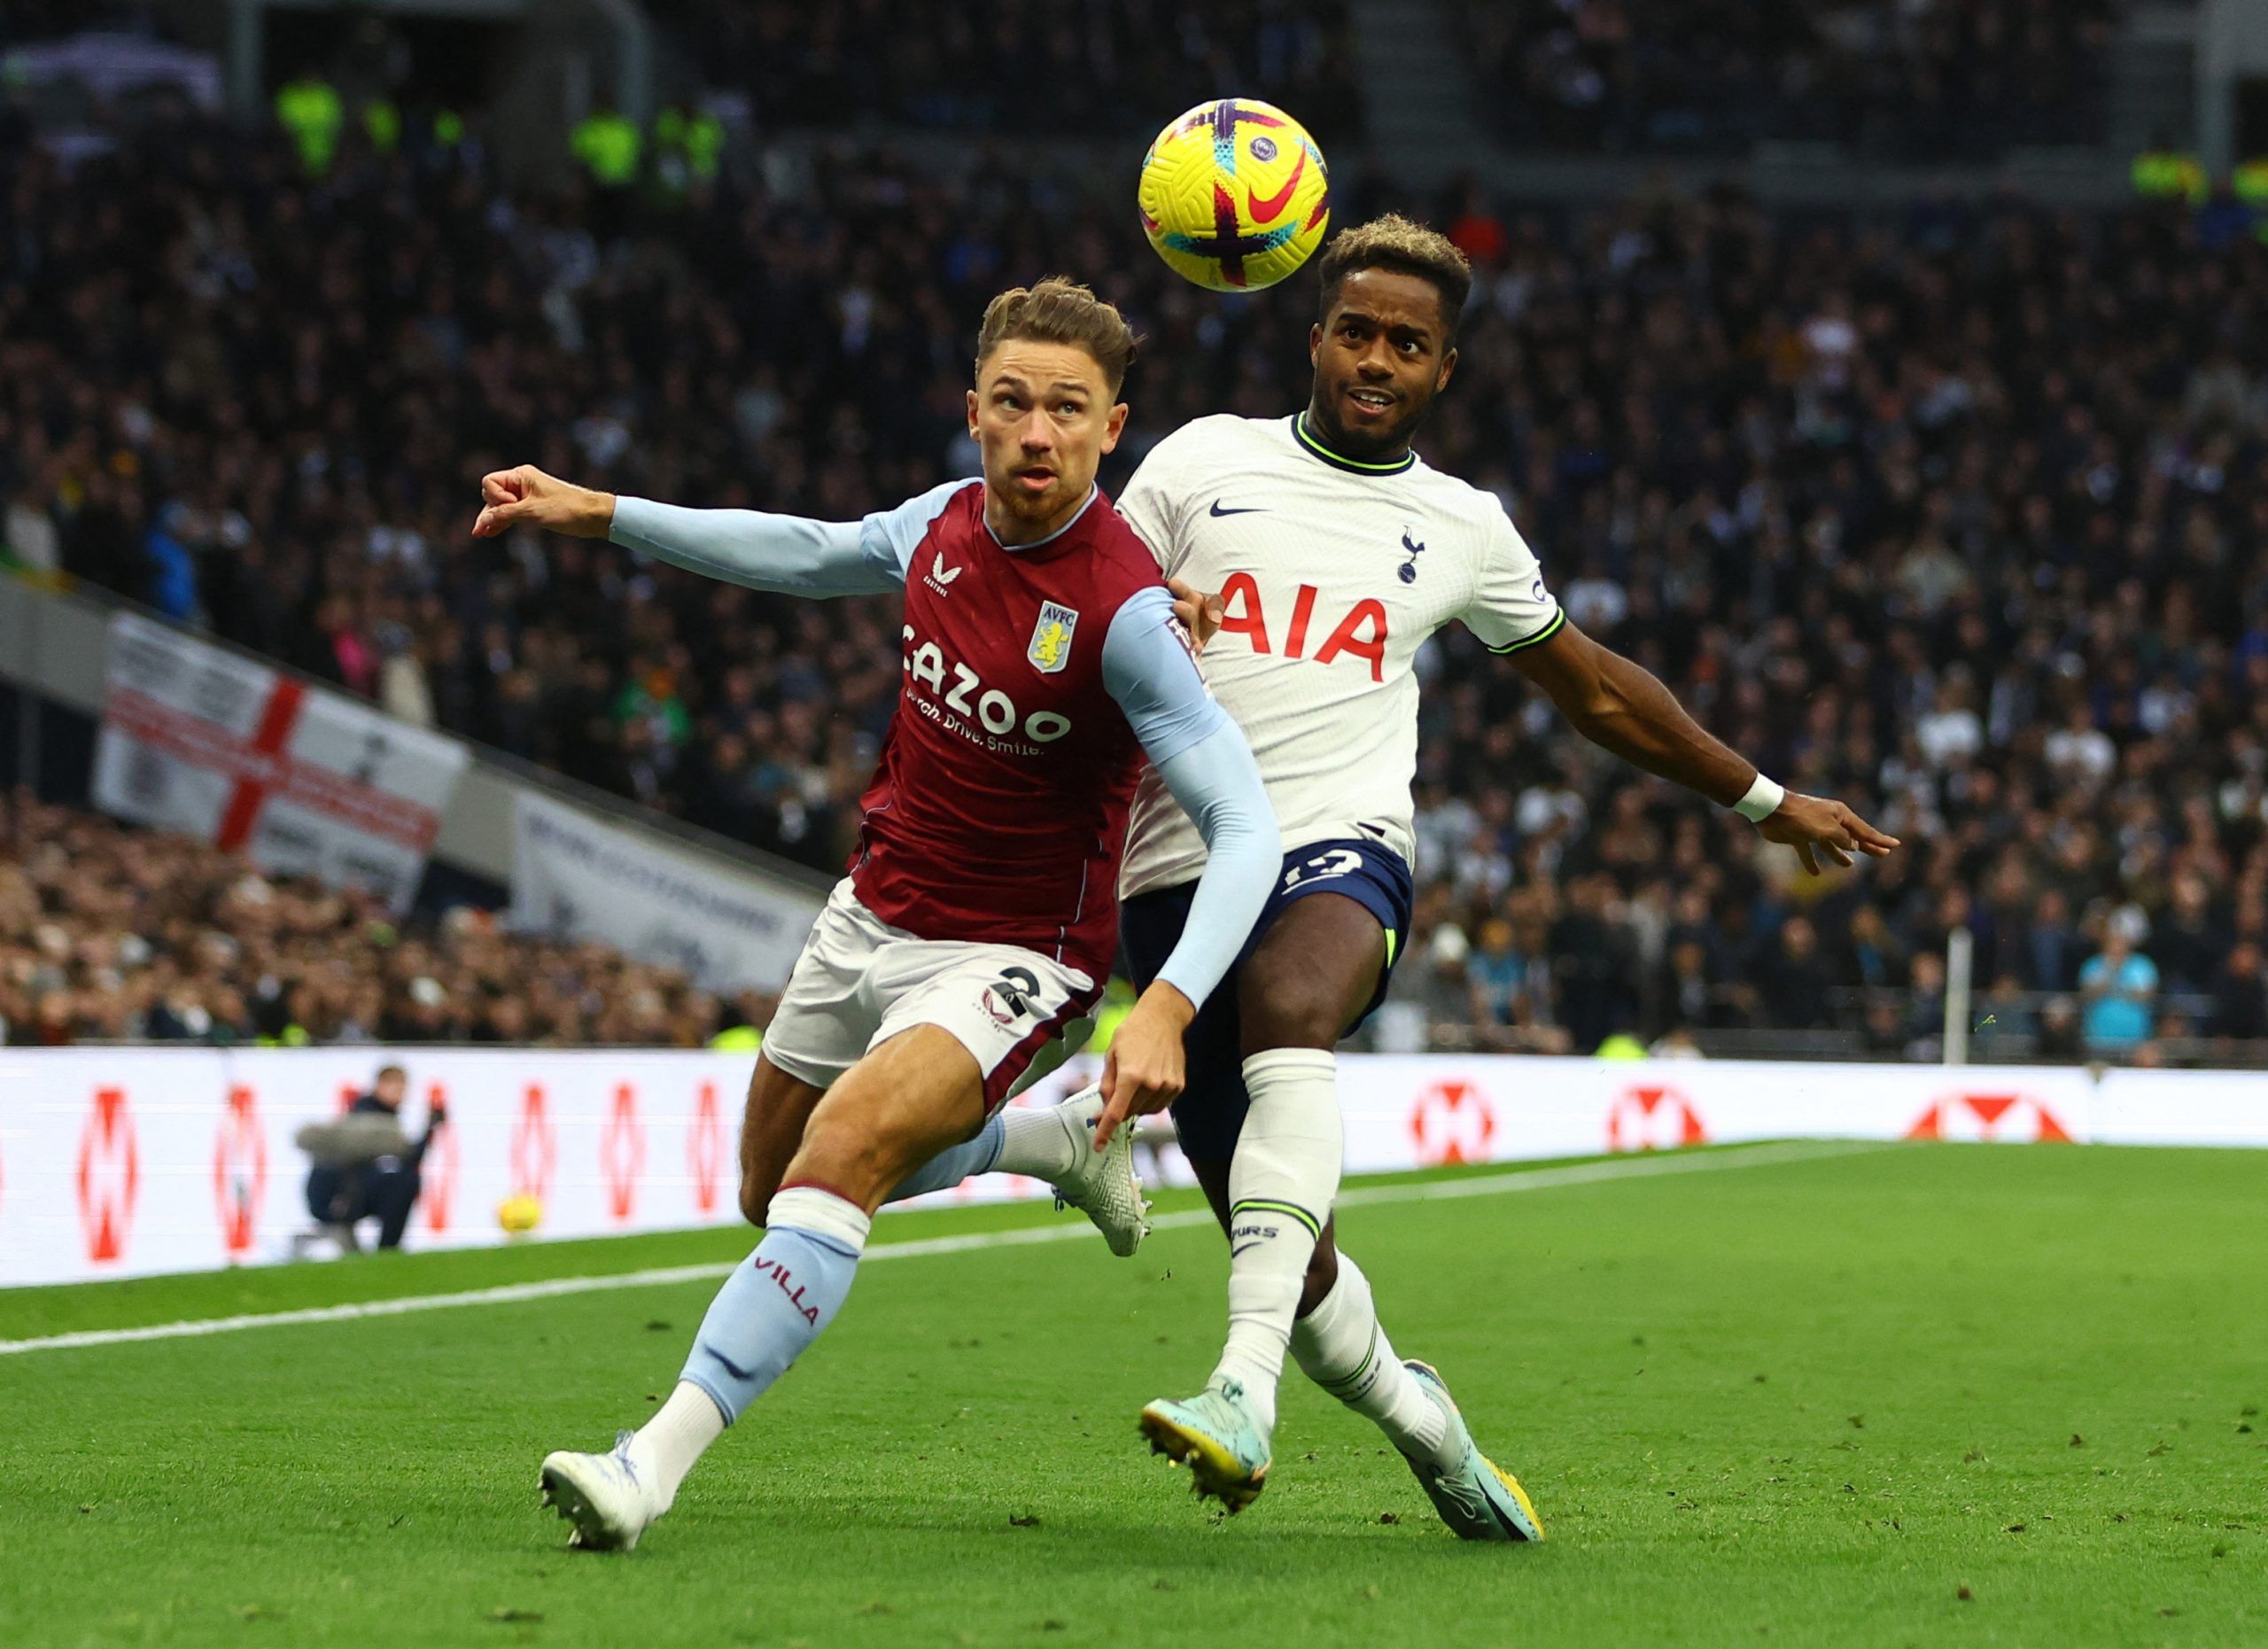 Soccer Football - Premier League - Tottenham Hotspur v Aston Villa - Tottenham Hotspur Stadium, London, Britain - January 1, 2023 Aston Villa's Matty Cash in action with Tottenham Hotspur's Ryan Sessegnon Action Images via Reuters/Paul Childs EDITORIAL USE ONLY. No use with unauthorized audio, video, data, fixture lists, club/league logos or 'live' services. Online in-match use limited to 75 images, no video emulation. No use in betting, games or single club /league/player publications.  Please 